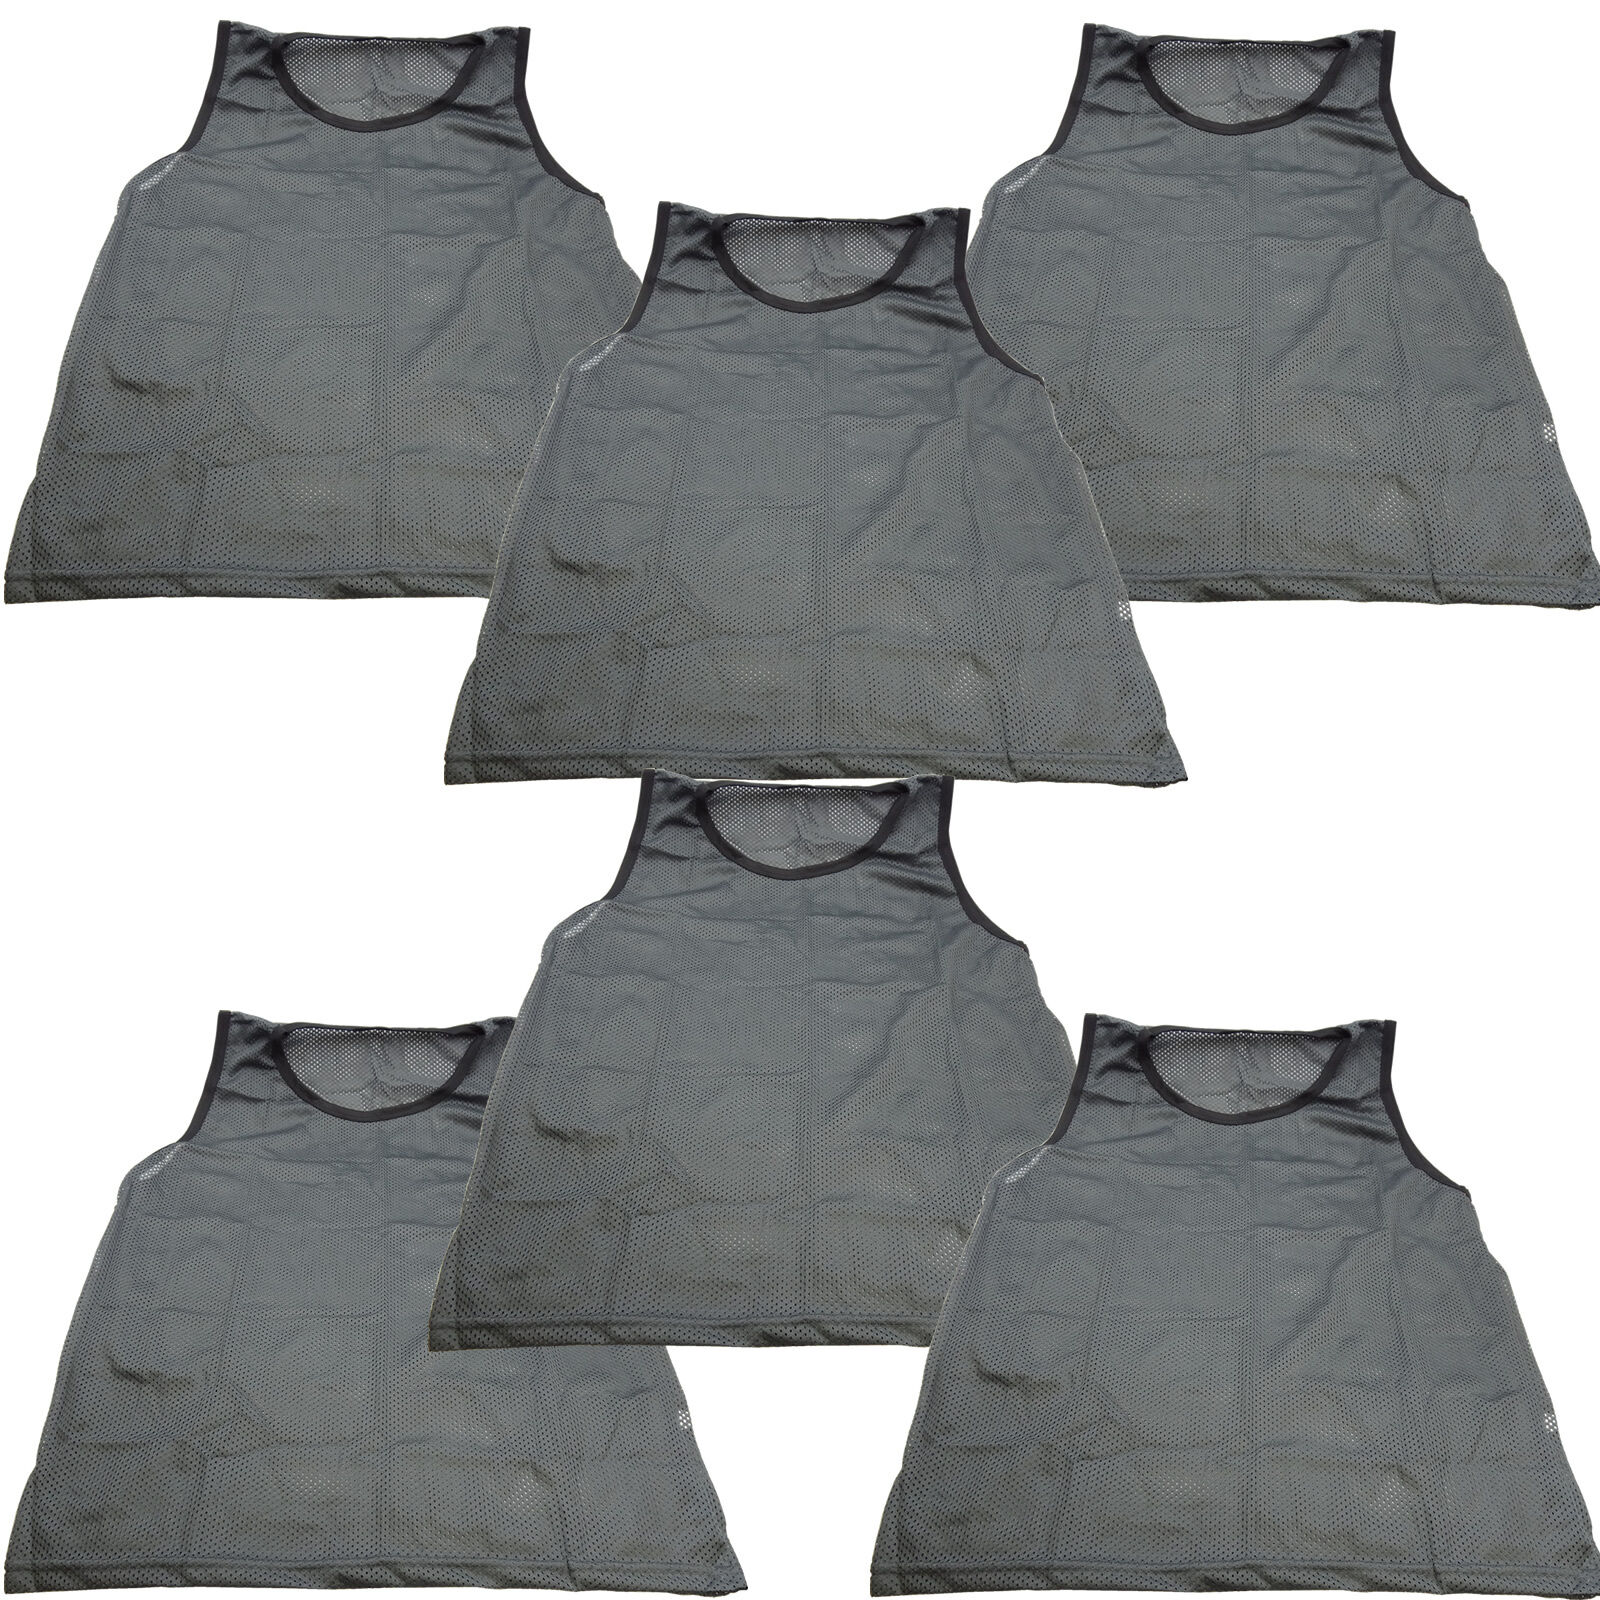 Great Choice Products 6 Pk Youth Girls Grey Scrimmage Vests Pinnies Team Sports Soccer Softball